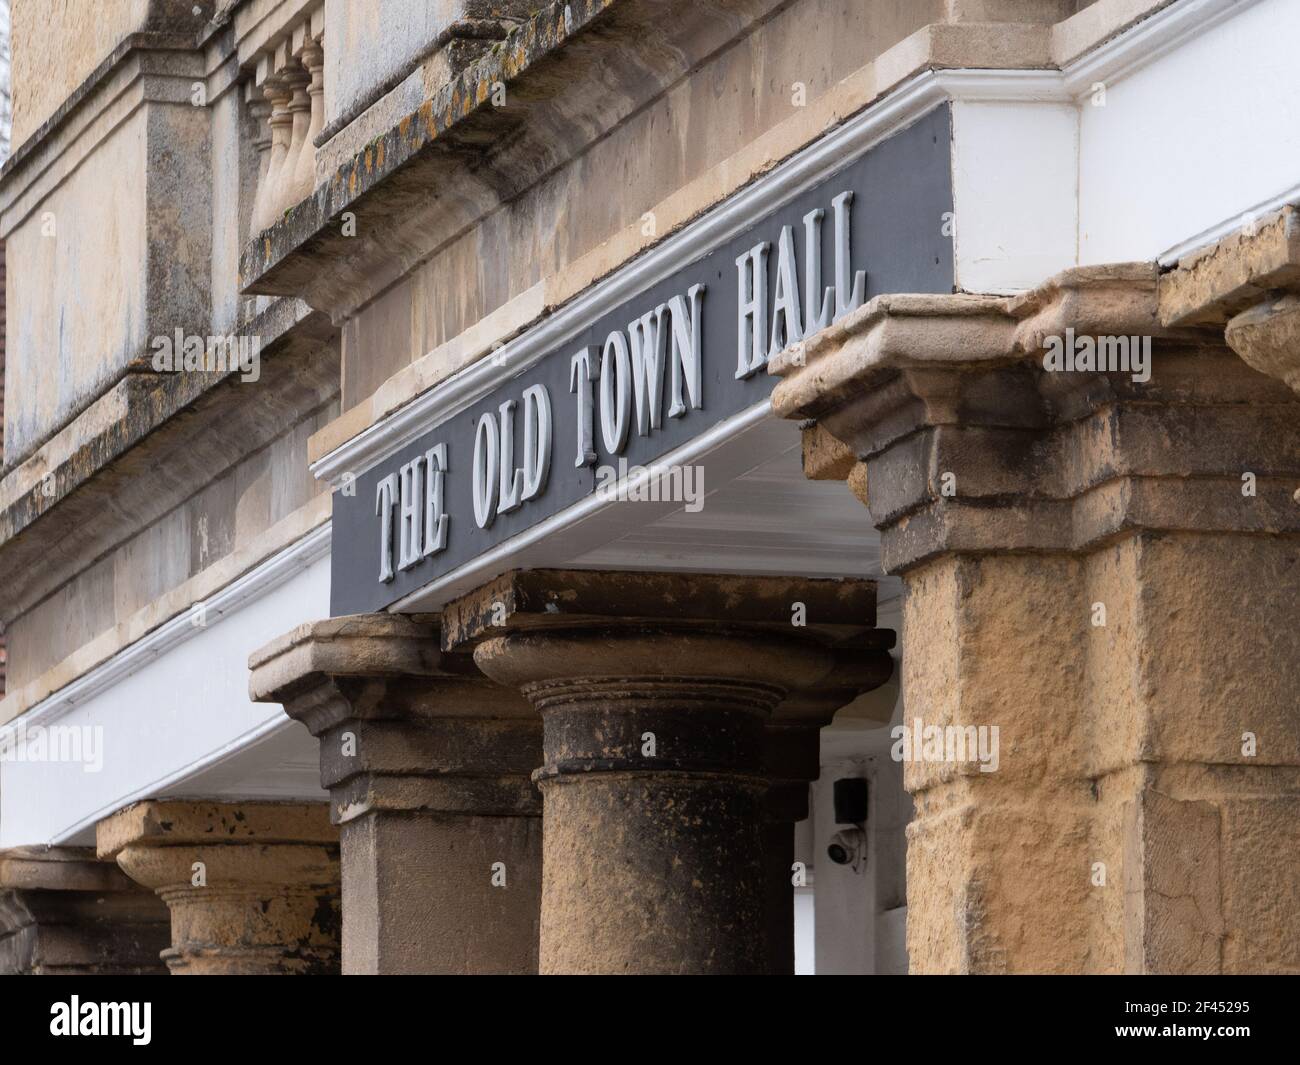 The Old Town Hall in Market Place, Westbury, Wiltshire, England, UK. Stock Photo